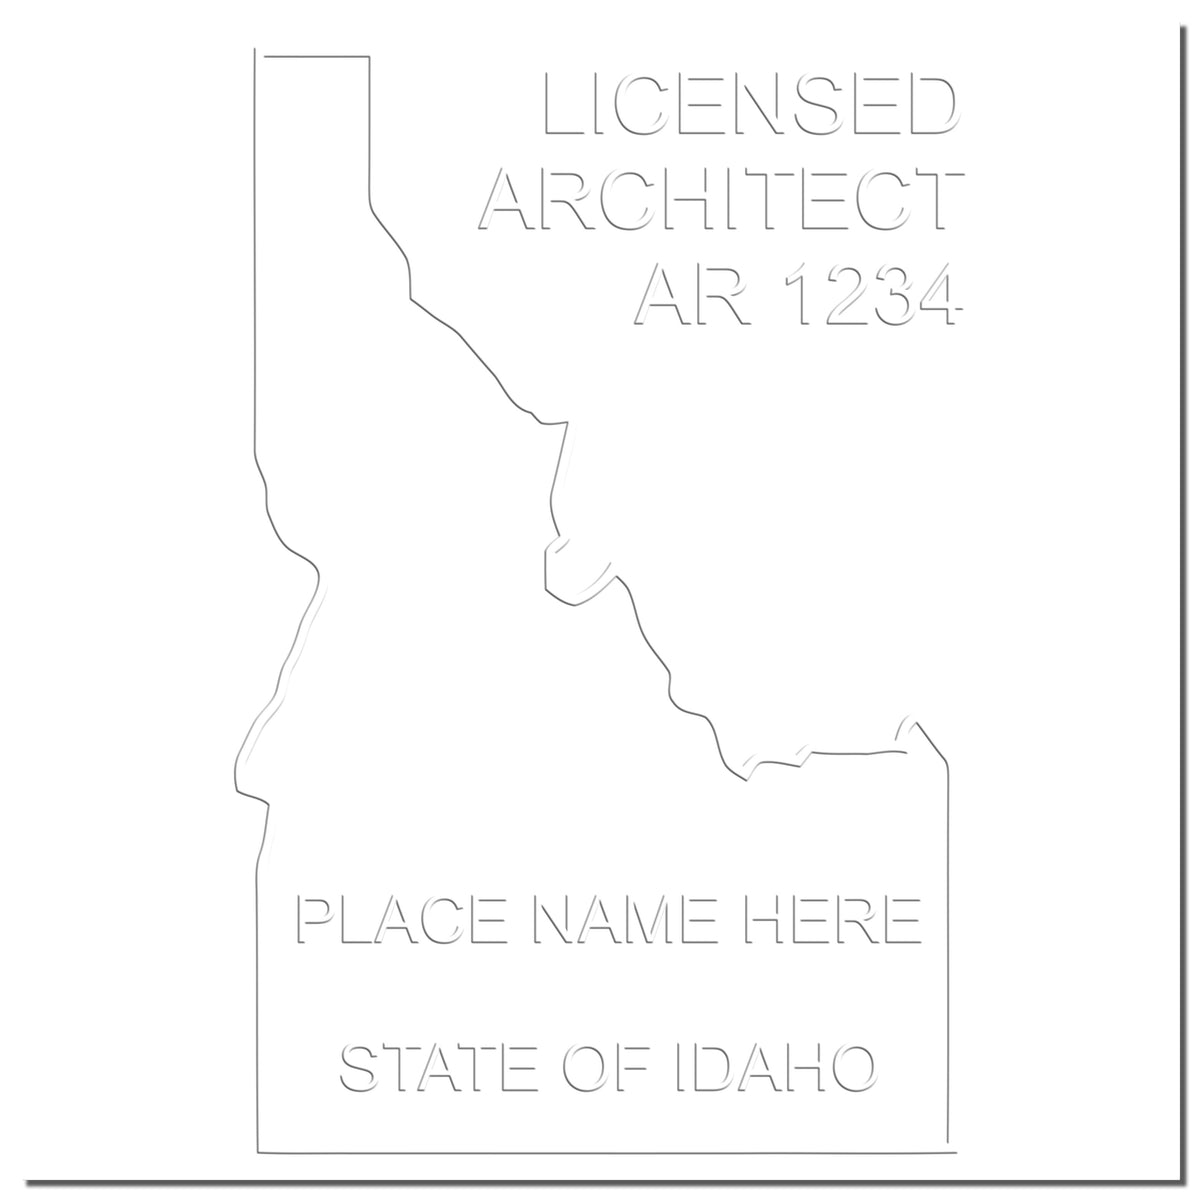 This paper is stamped with a sample imprint of the State of Idaho Architectural Seal Embosser, signifying its quality and reliability.